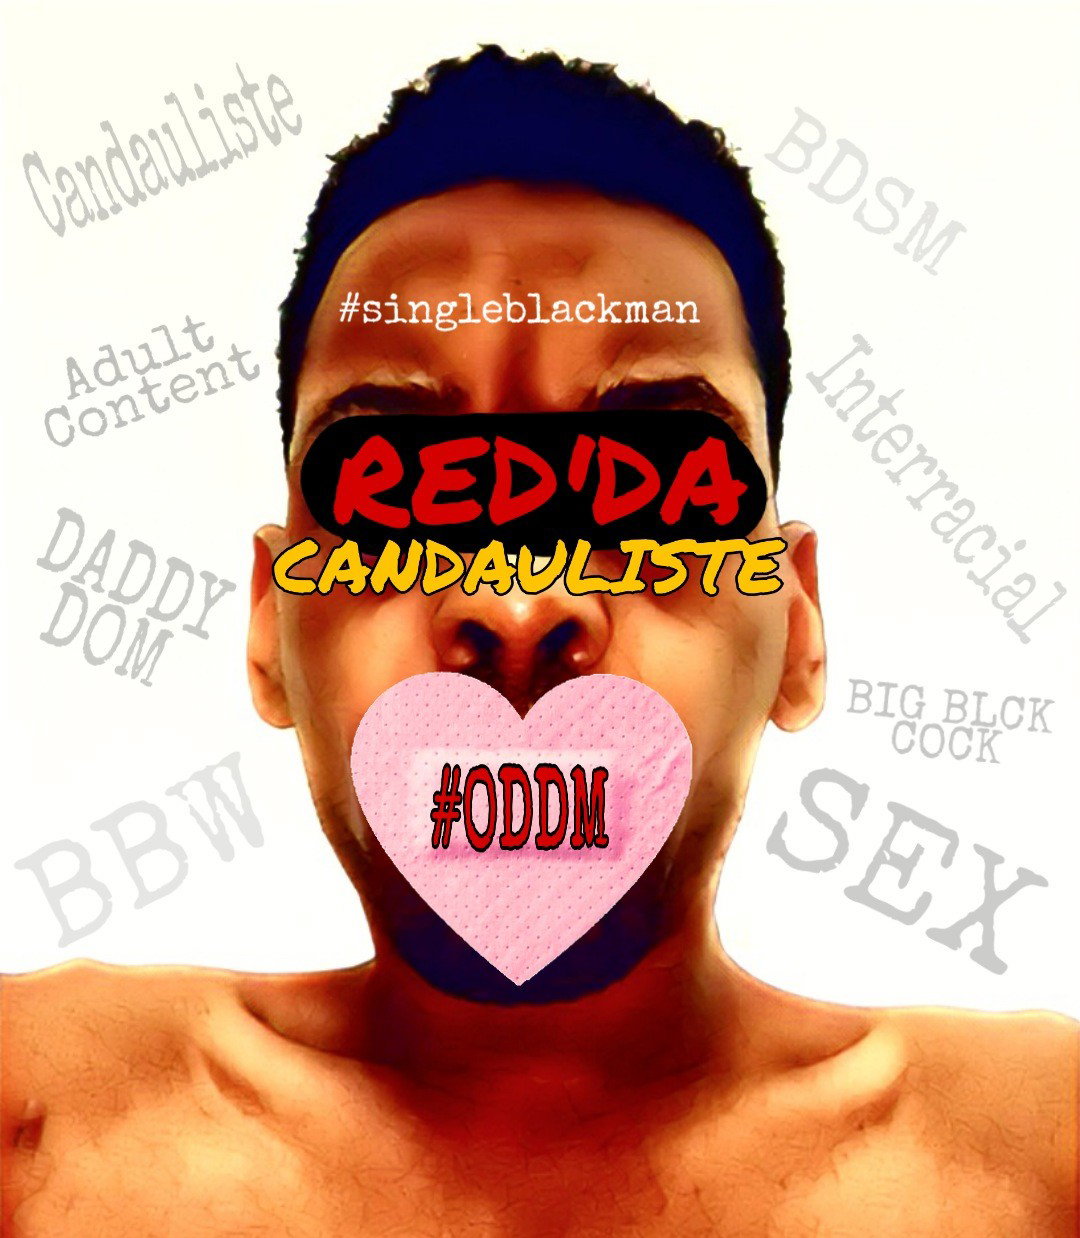 Photo by T.Y.S.O.N with the username @singleblackman,  September 21, 2020 at 8:53 AM and the text says 'My name is "RED" the #singleblackman #daddydom #candauliste & #contentcreator looking for dirty minded freaks, like me!!! #ondaddiesdirtymind'